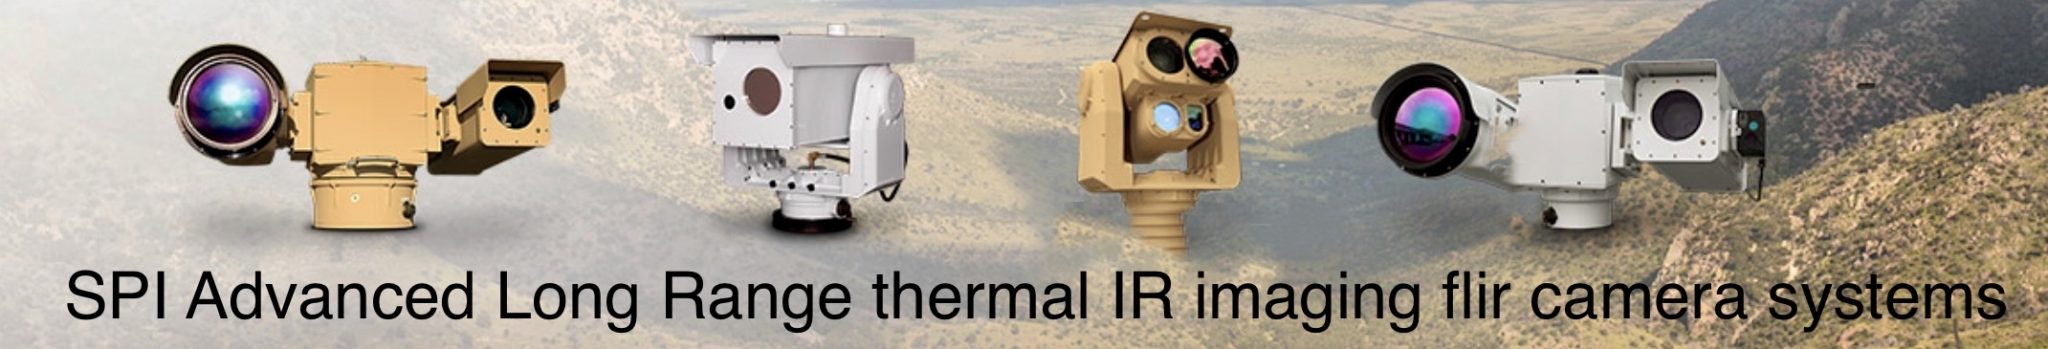 FOR LONG RANGE FIXED MOBILE/MARINE/MAST/RADAR/PTZ EO/IR MULTI DAY-NIGHT VISION FLIR THERMAL IMAGING CAMERAS, CLICK HERE FOR A WIDE ASSORTMENT OF SYSTEMS